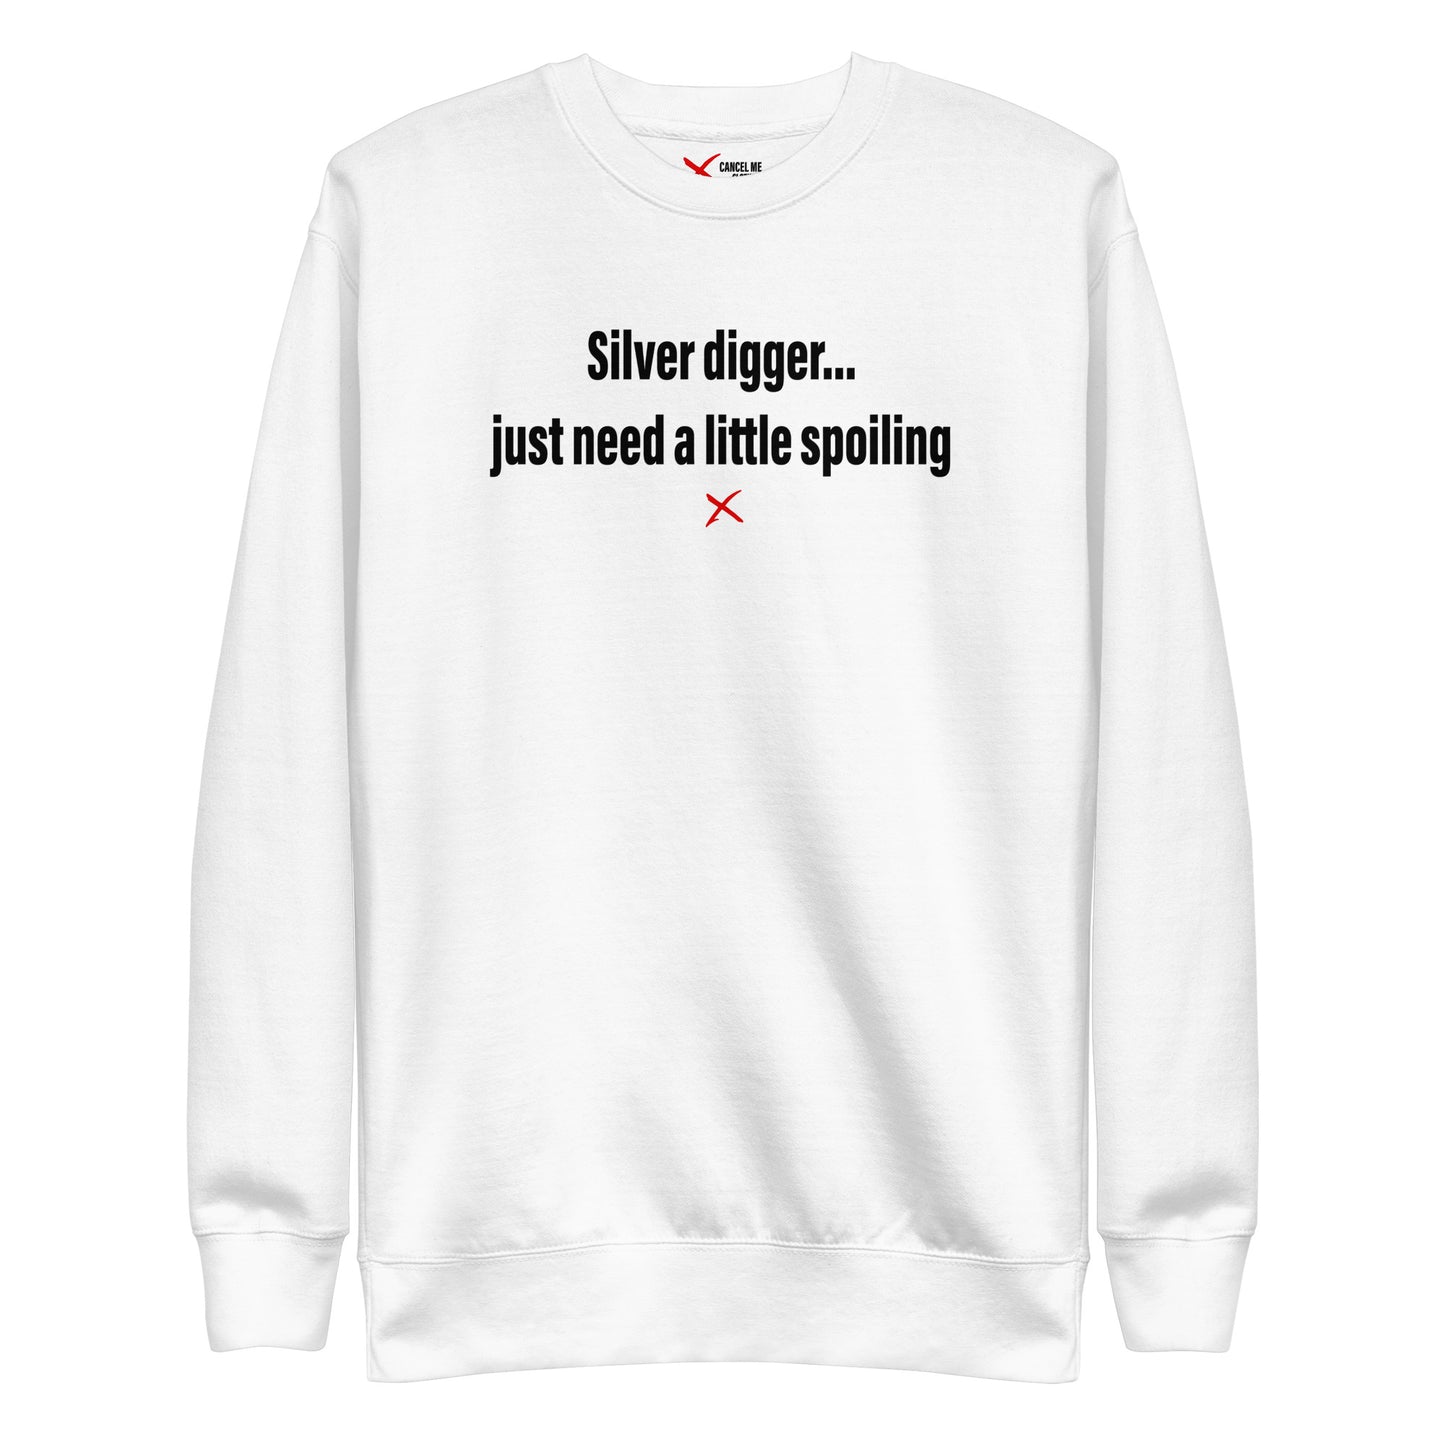 Silver digger... just need a little spoiling - Sweatshirt